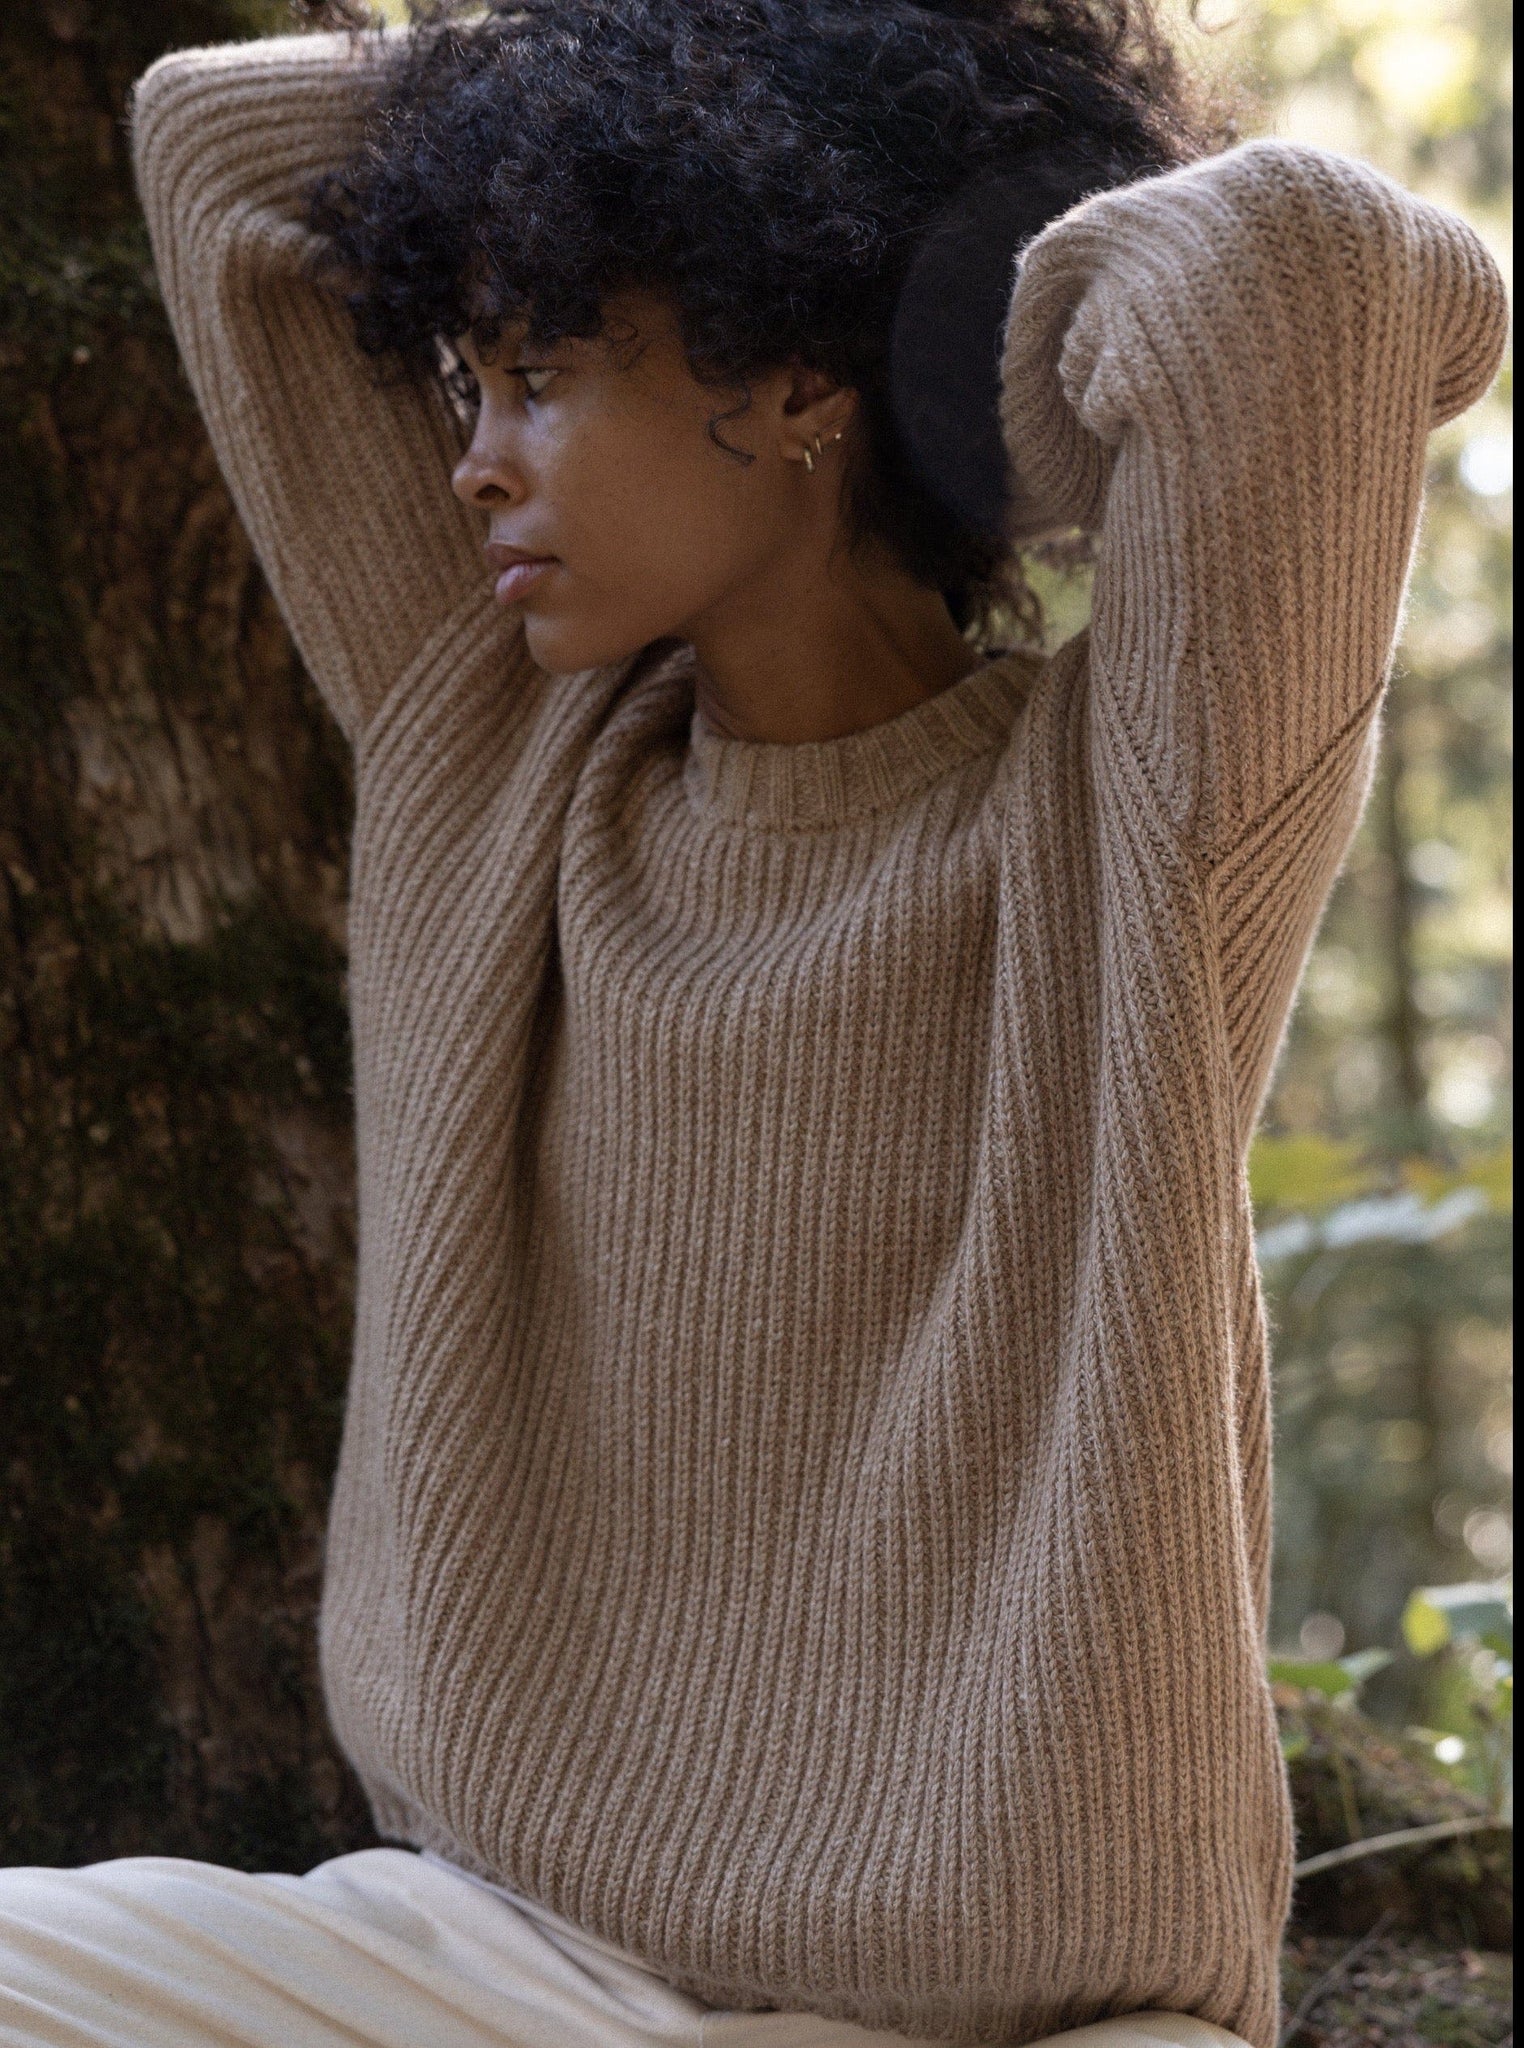 A woman in a Field Sweater - Caramel leaning against a tree in the woods.